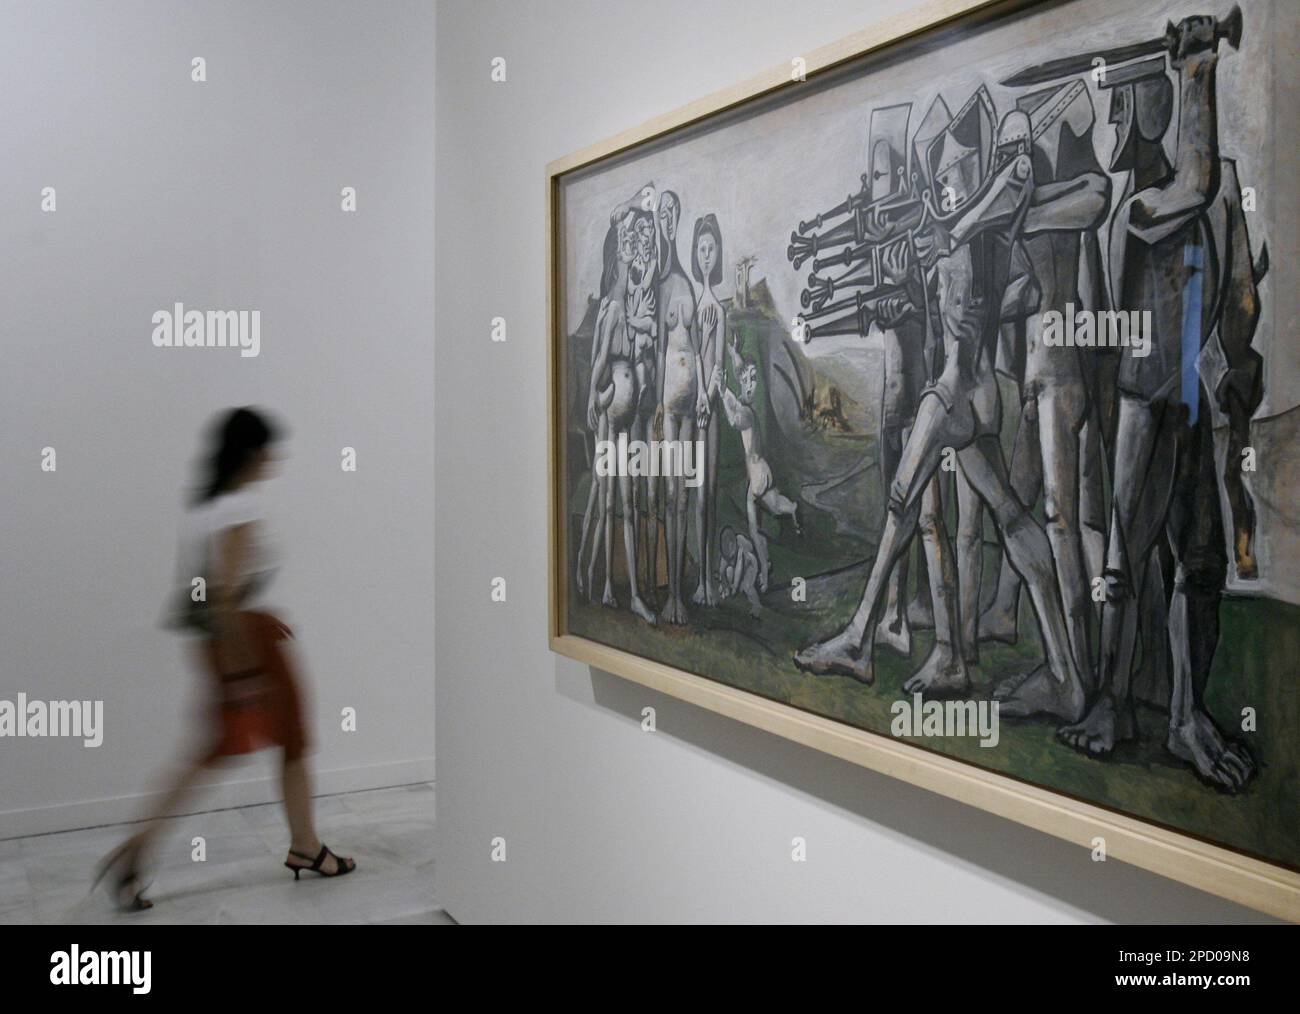 A visitor crosses in front Spanish artist Pablo Picasso's painting "Massacre in Korea" at Madrid's Reina Sofia museum in Madrid, Tuesday, June 6, 2006. Spain celebrates the 25th anniversary of the return of "Guernica" this year and the 125th anniversary of Picassos birth. The painting depicts the German bombing of this small Basque town during the Spanish Civil War. (AP Photo/Bernat Armangue) Banque D'Images